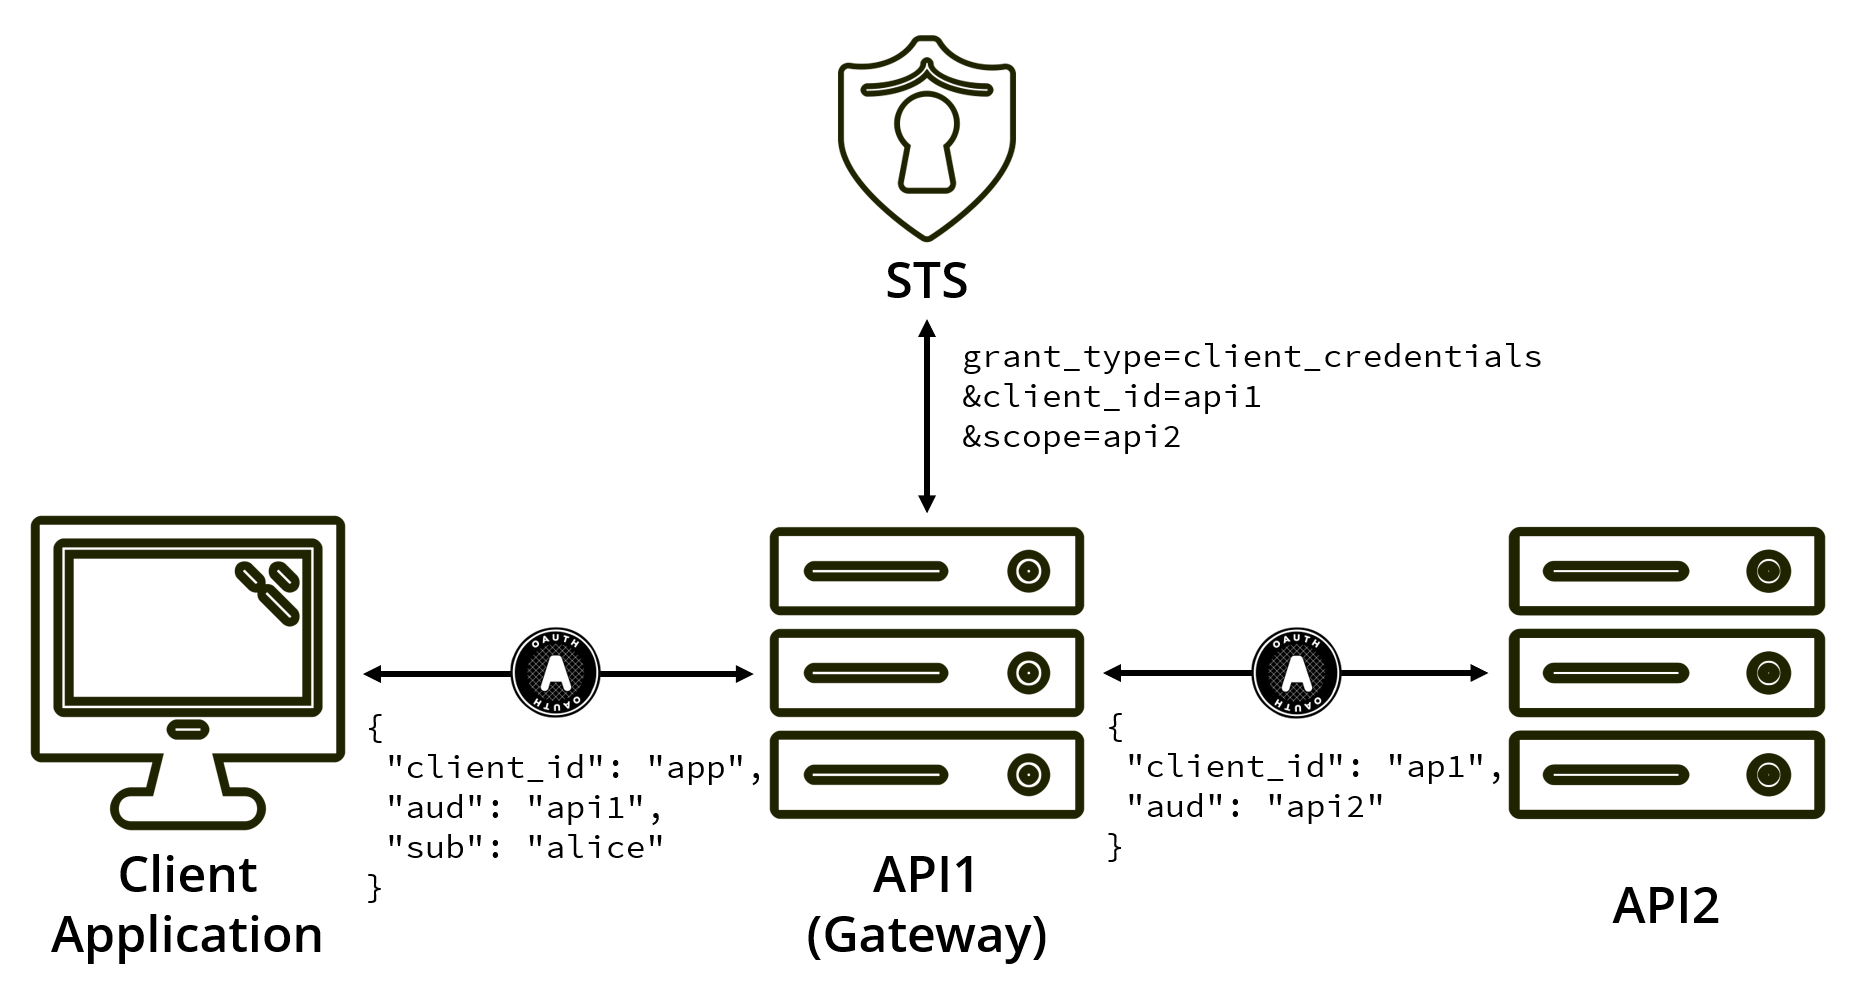 An API gateway using client credentials to talk to another API, but losing track of the user